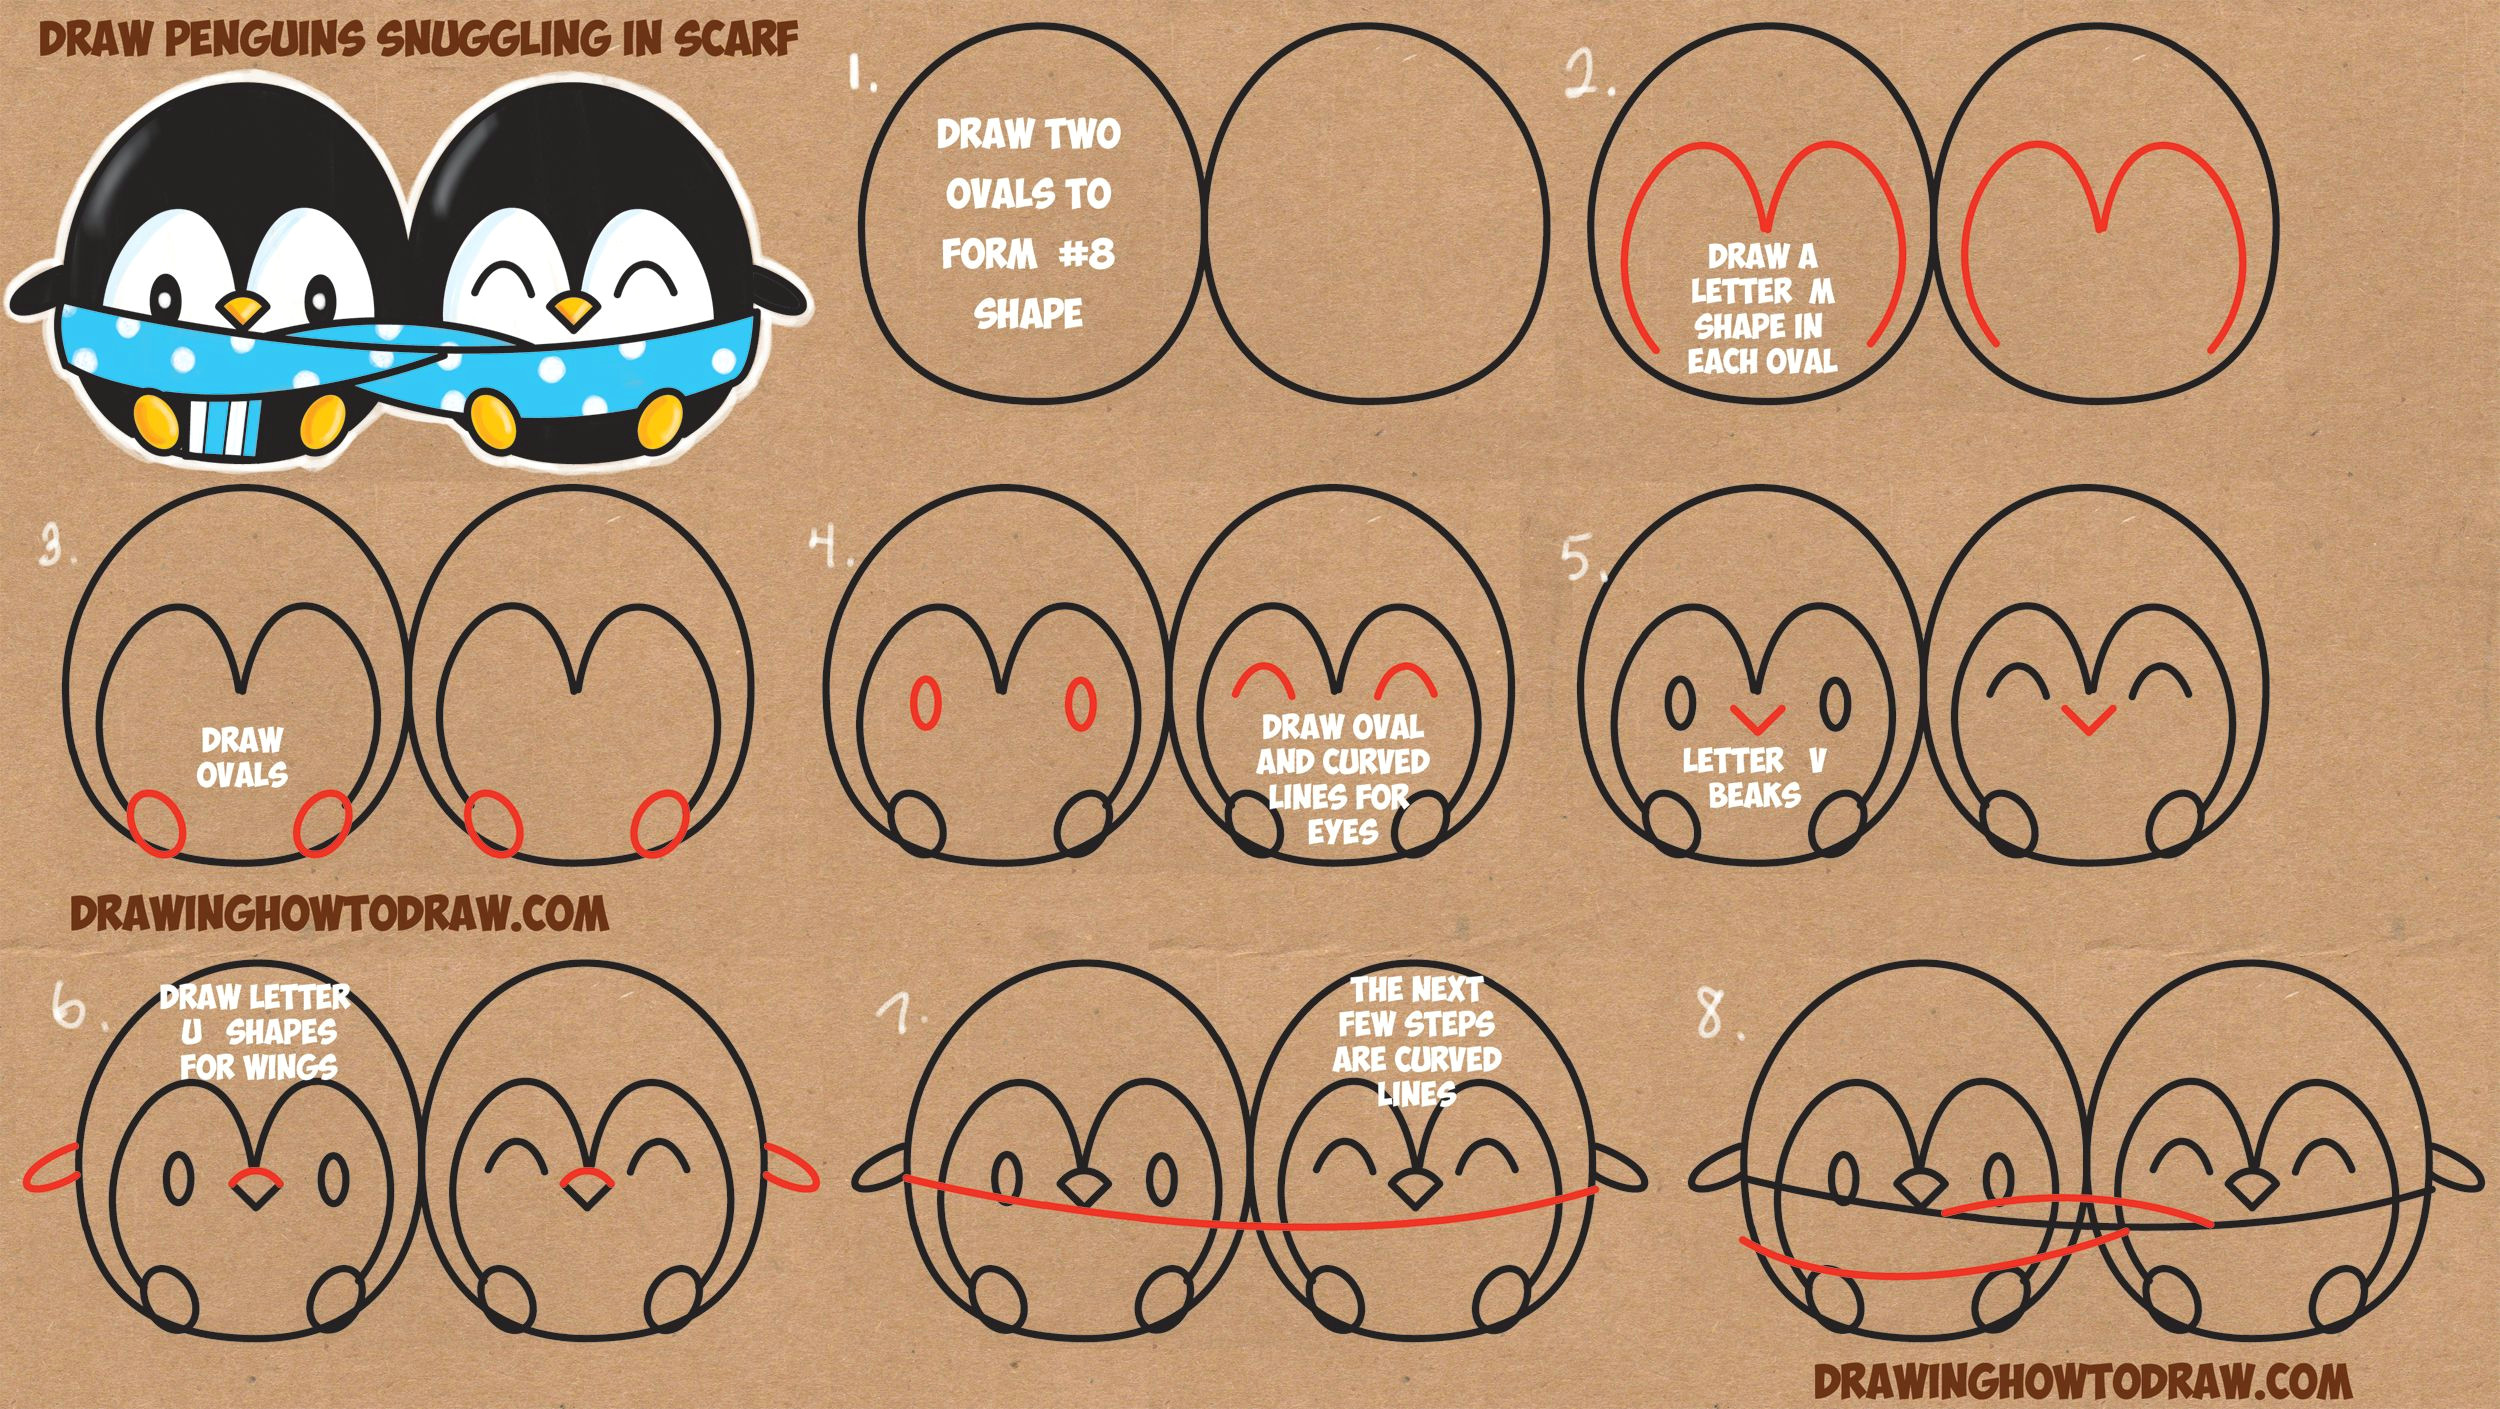 Drawing Cartoons Two How to Draw Cute Kawaii Chibi Cartoon Penguins In A Scarf for